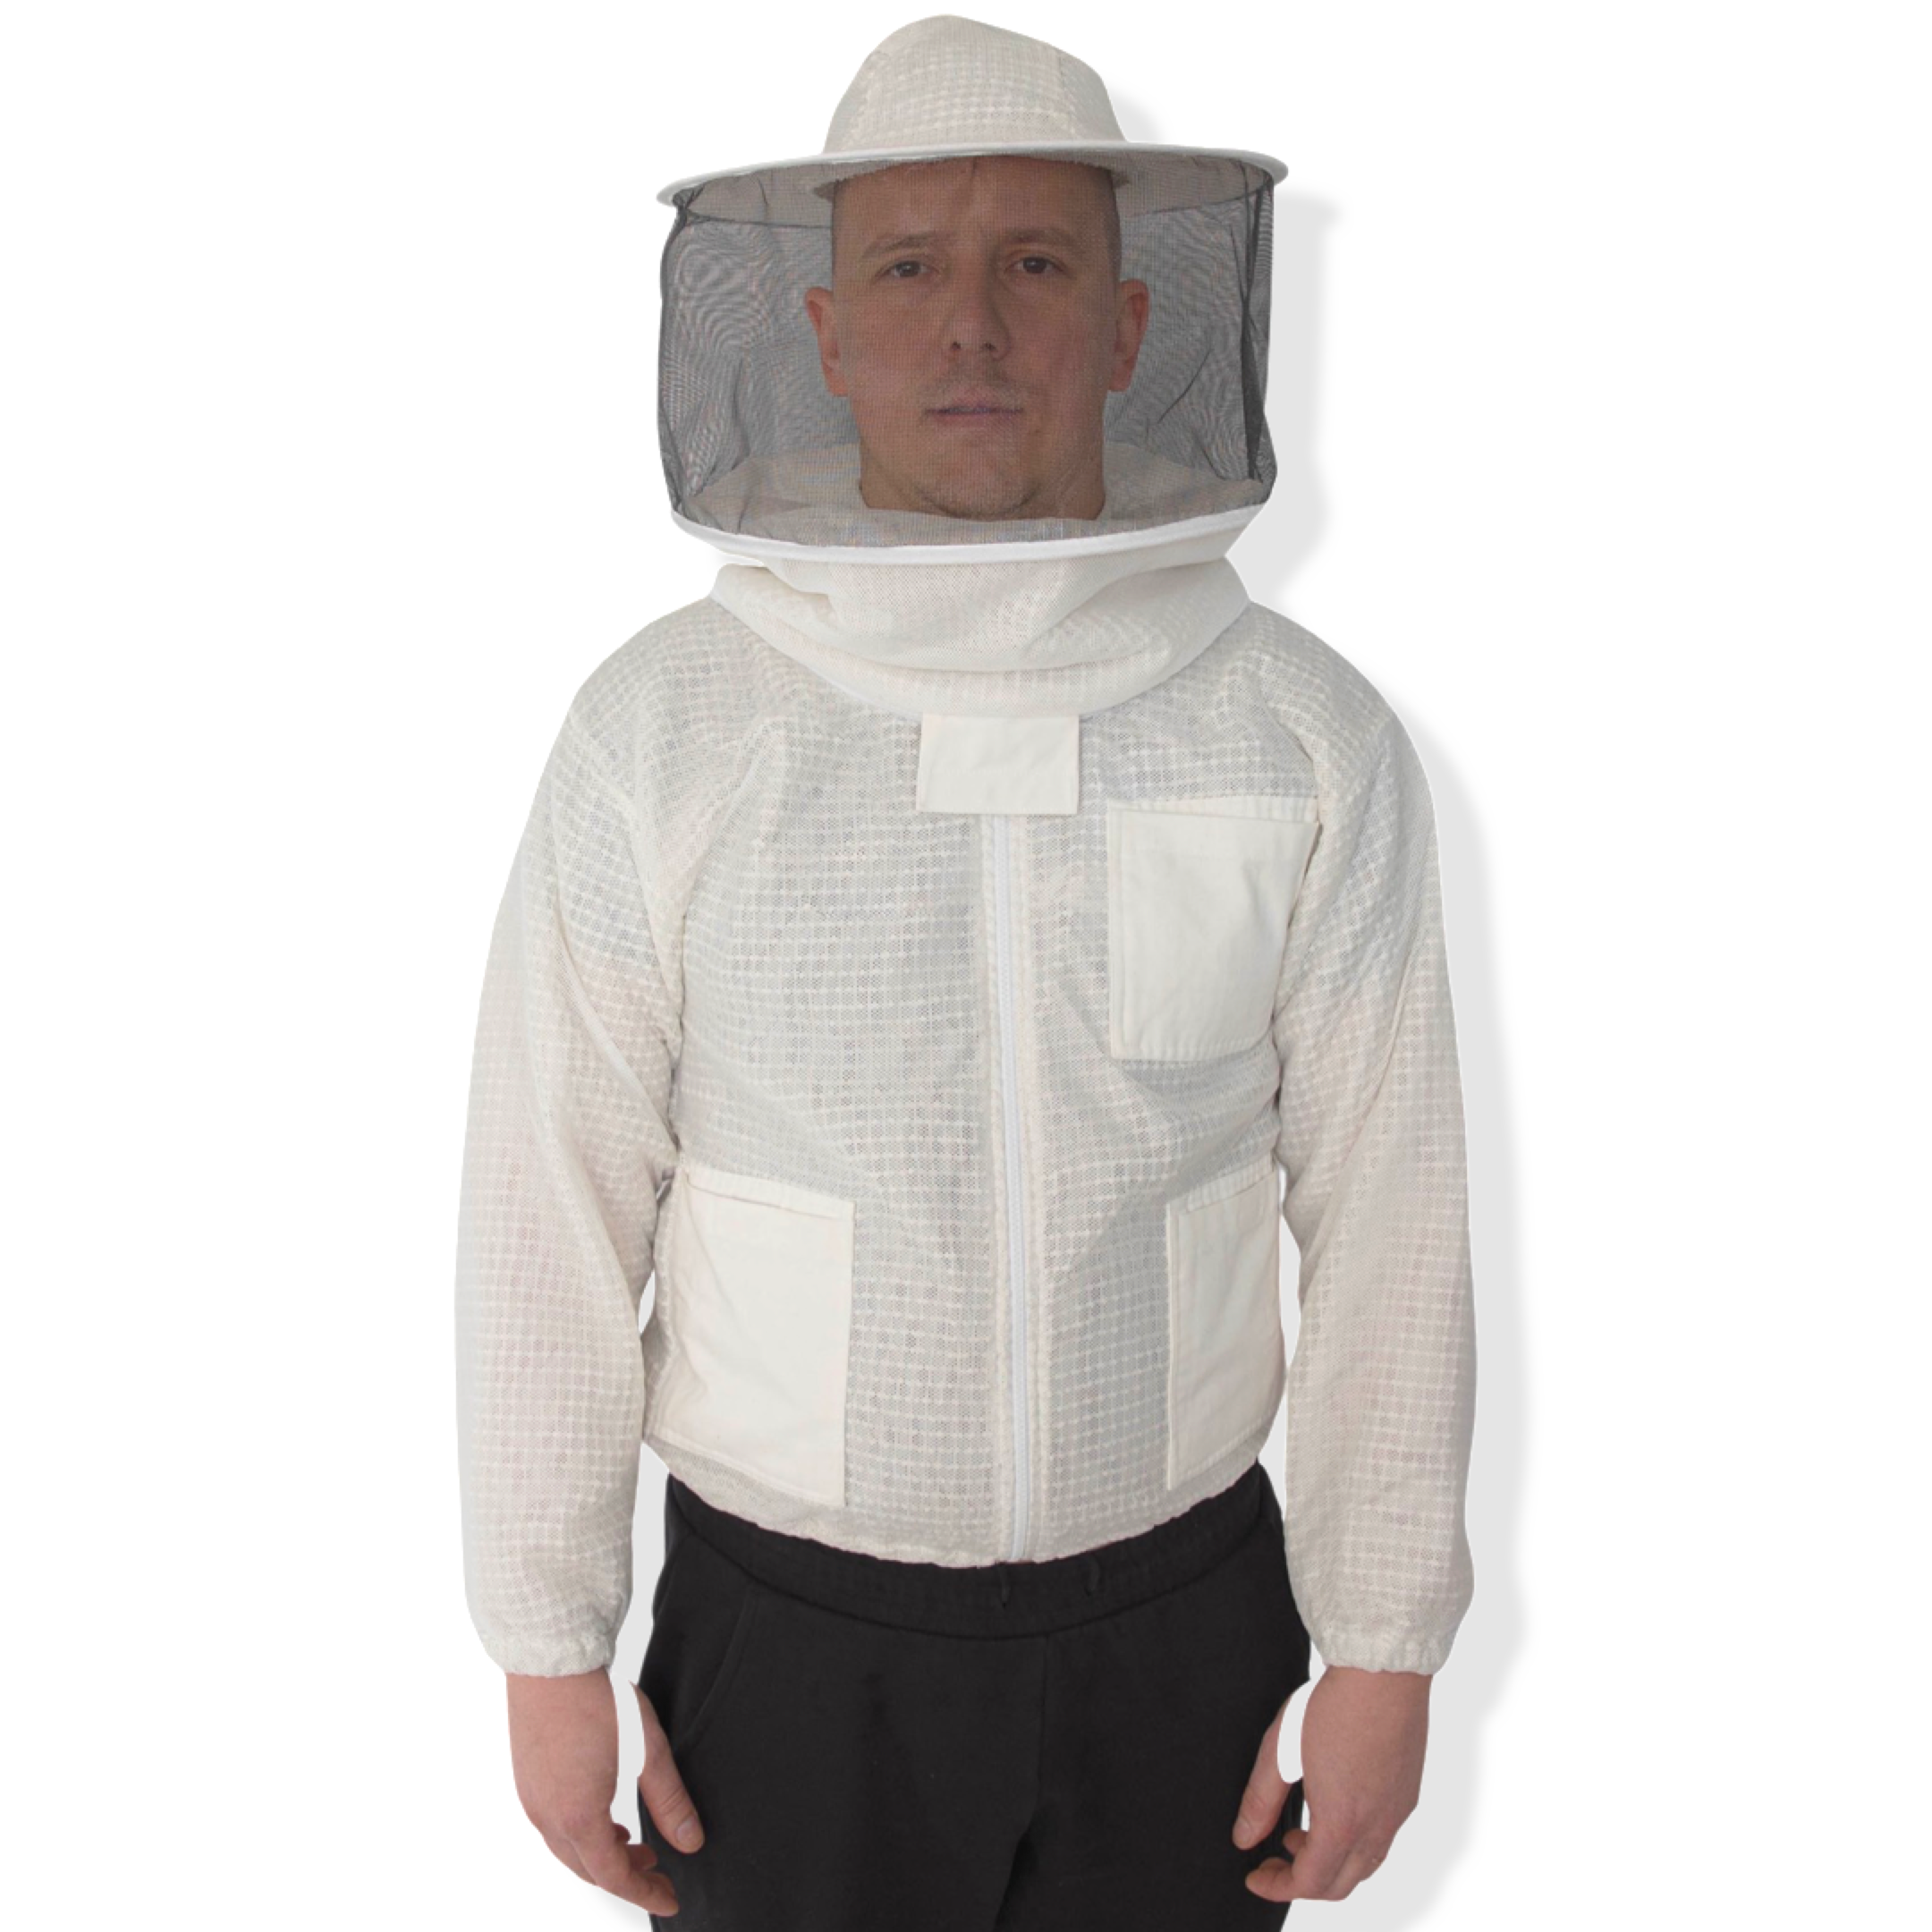 Details about   Beekeeper Ultra Ventilated 3 layer mesh XL Beekeeping suit Bee Hat Veil xl 